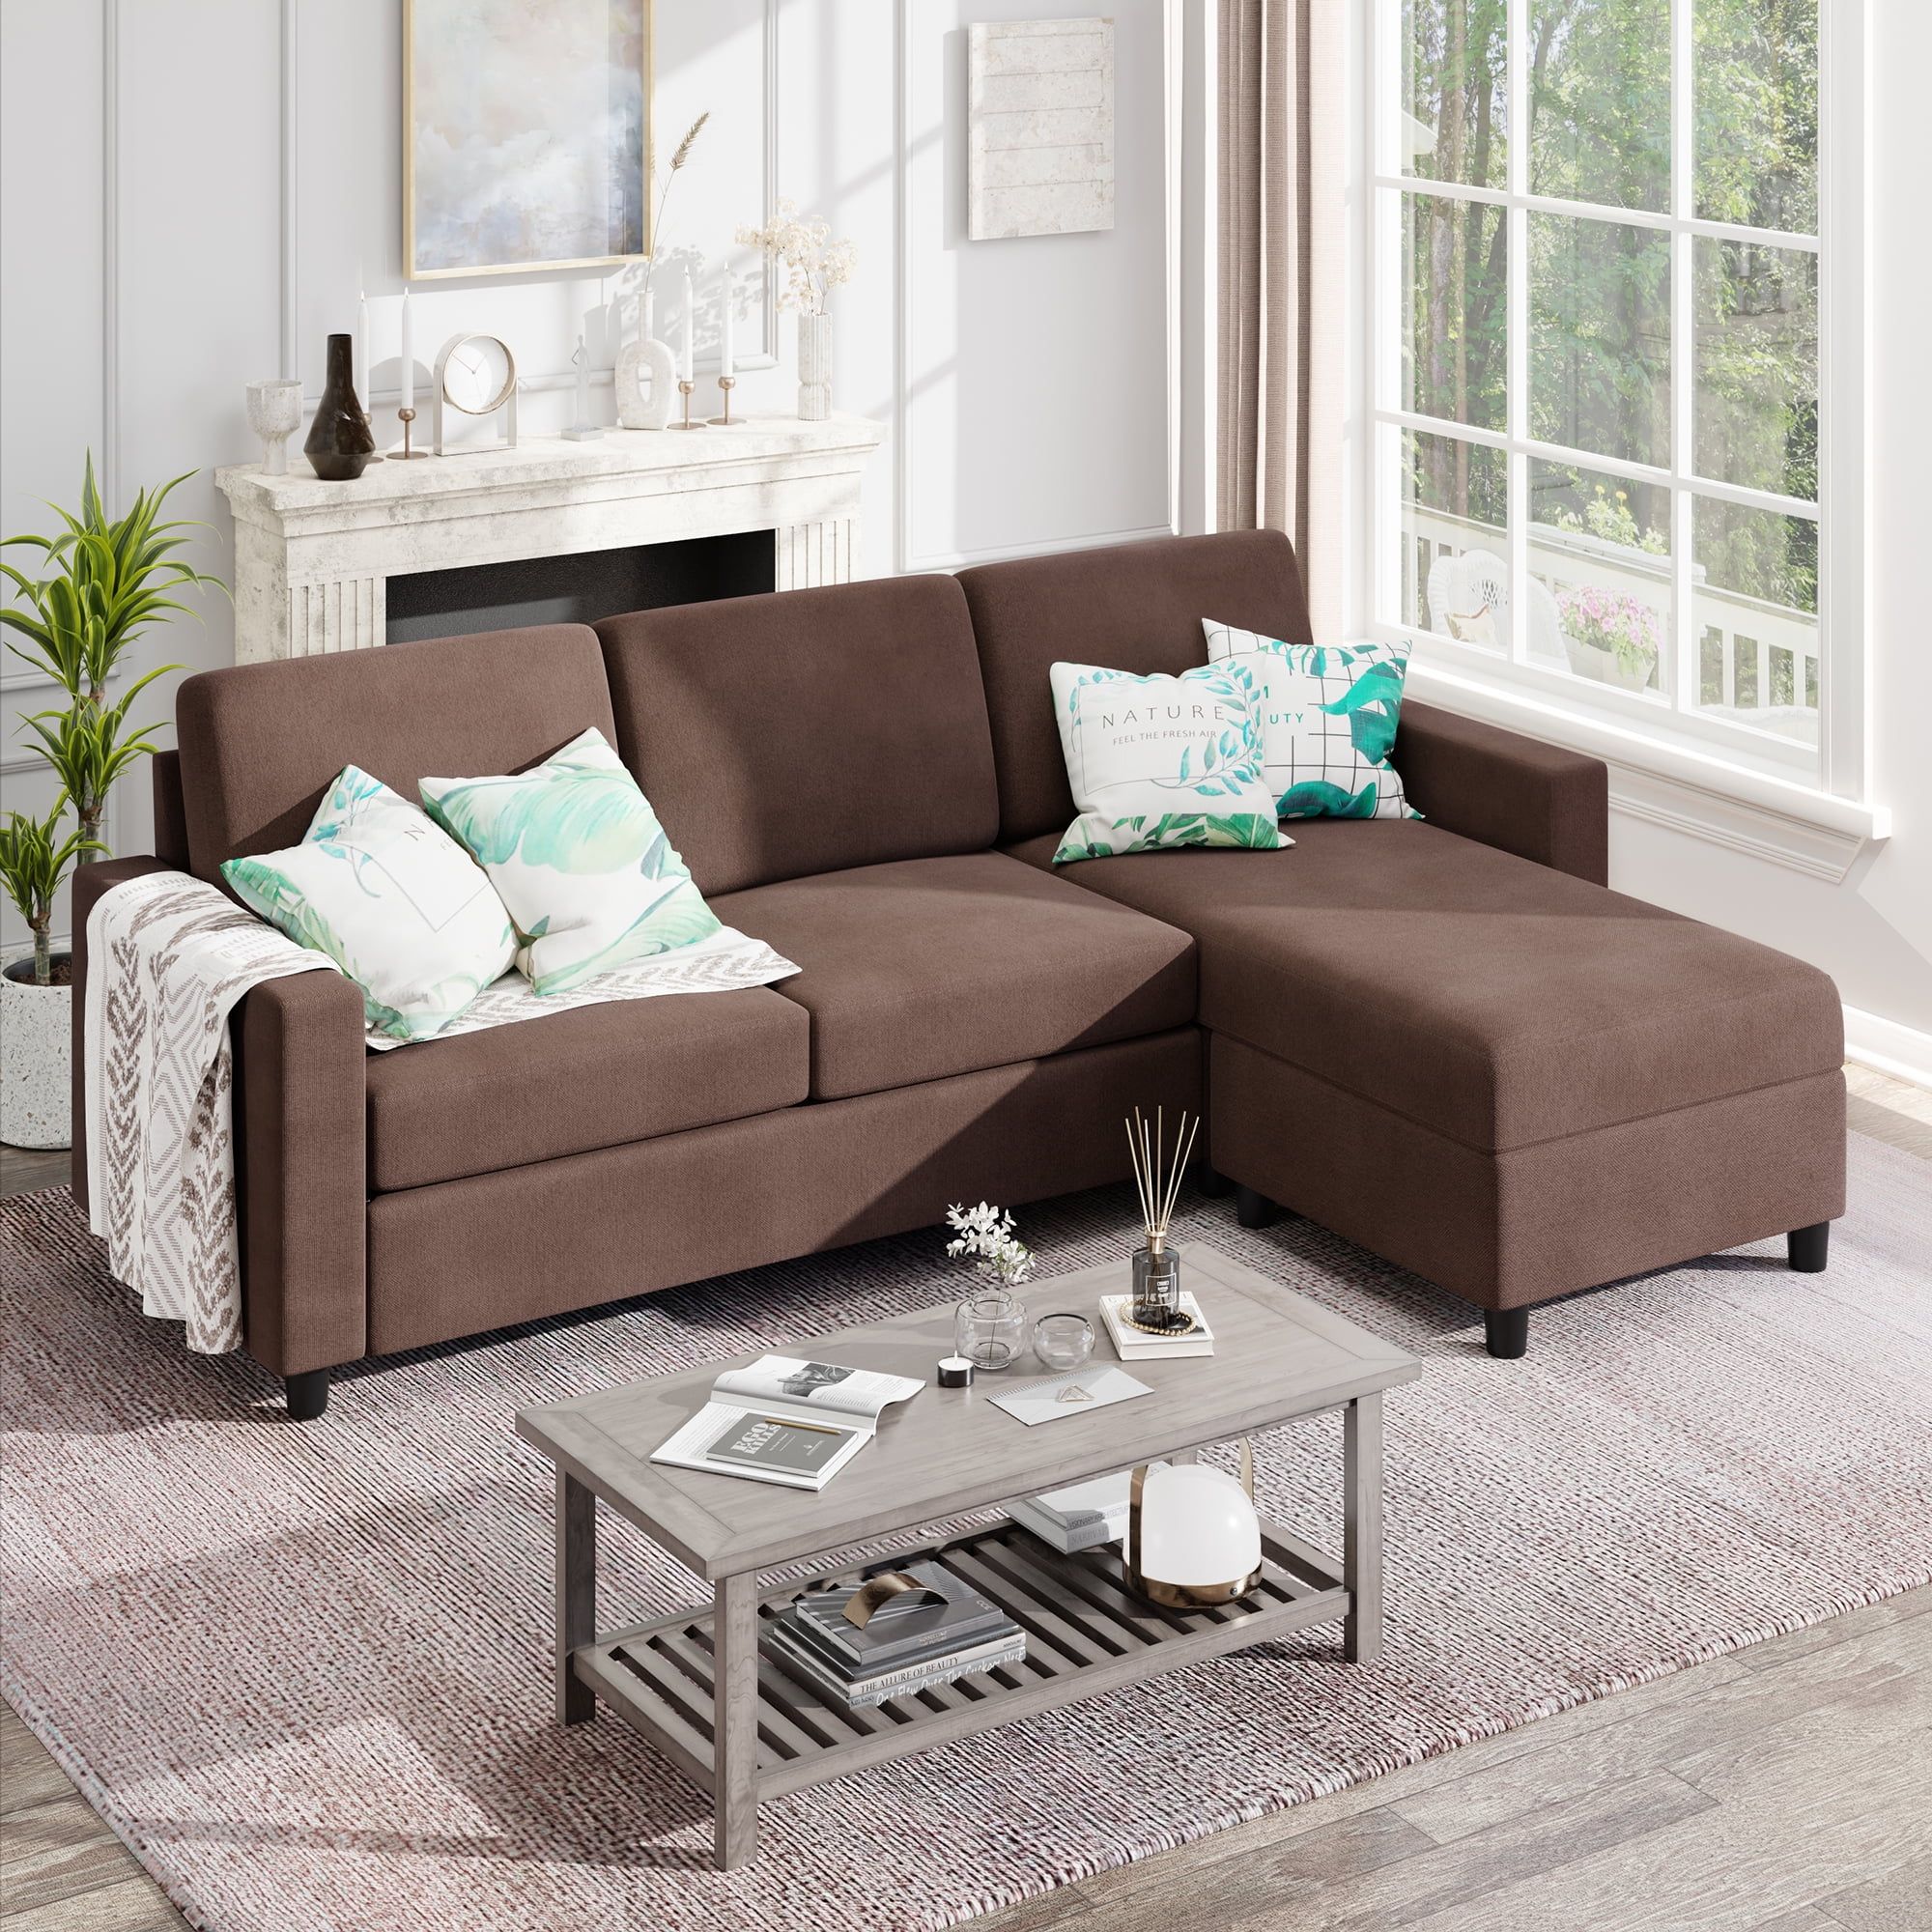 Sobaniilo Convertible Sectional Sofa Couch, Modern Linen Fabric L Shaped  3 Seat Sofa Sectional With Reversible Chaise For Small Space (light Gray) –  Walmart With Regard To Small L Shaped Sectional Sofas In Beige (View 7 of 15)